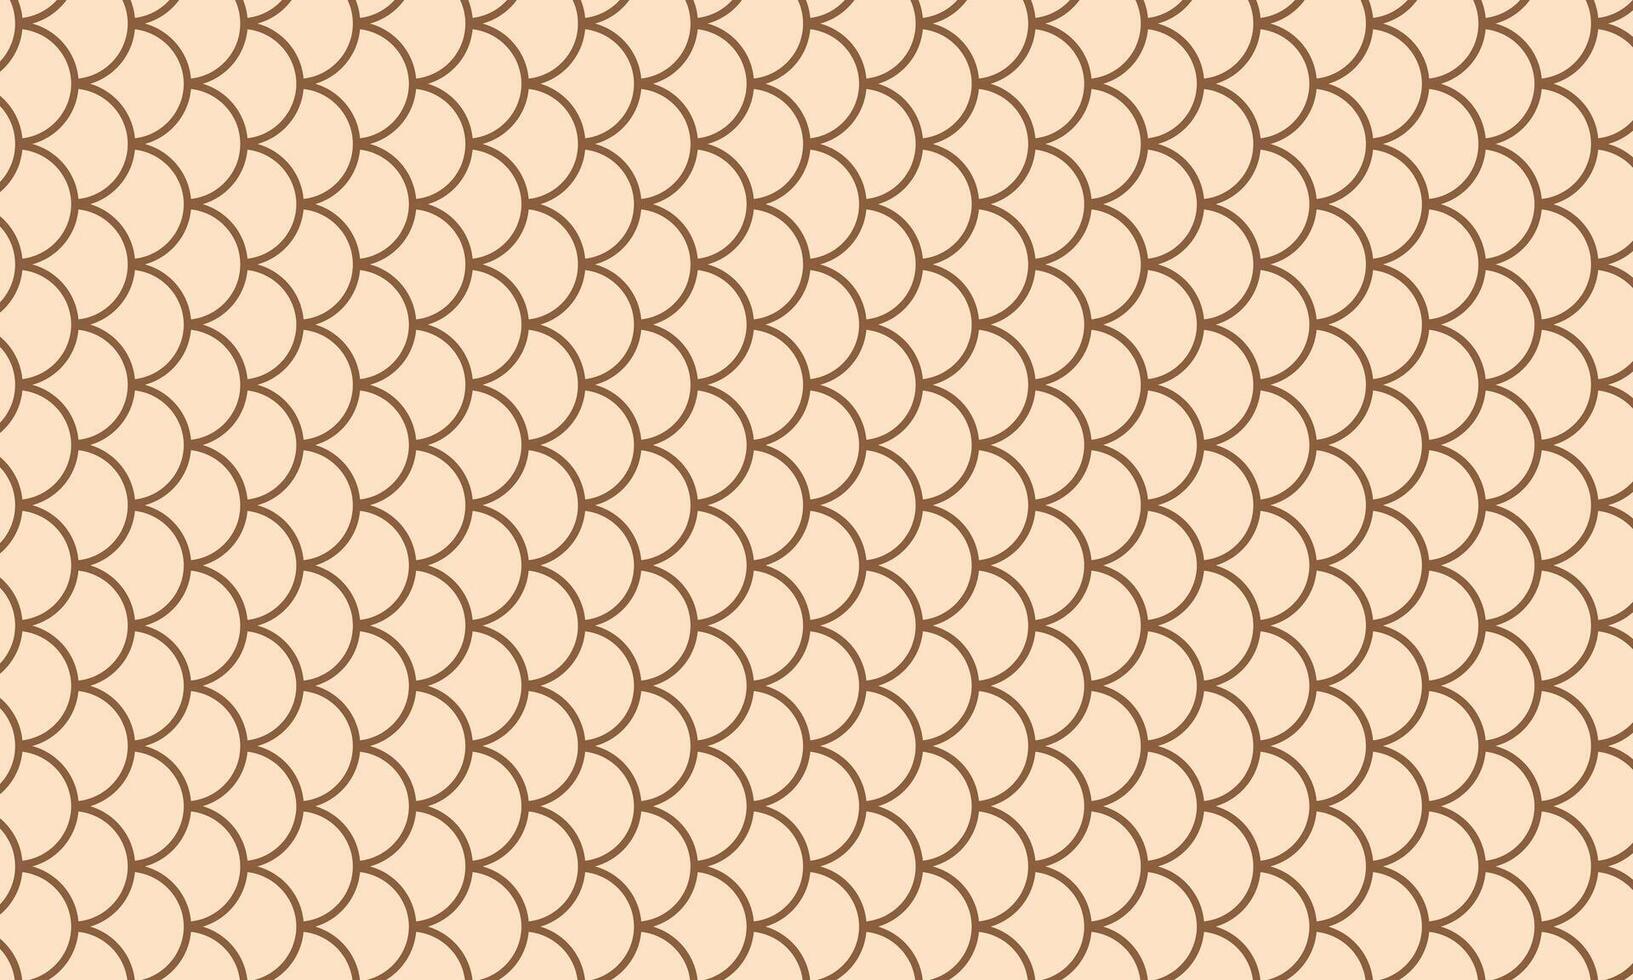 abstract geometric fish scale pattern vector illustration.